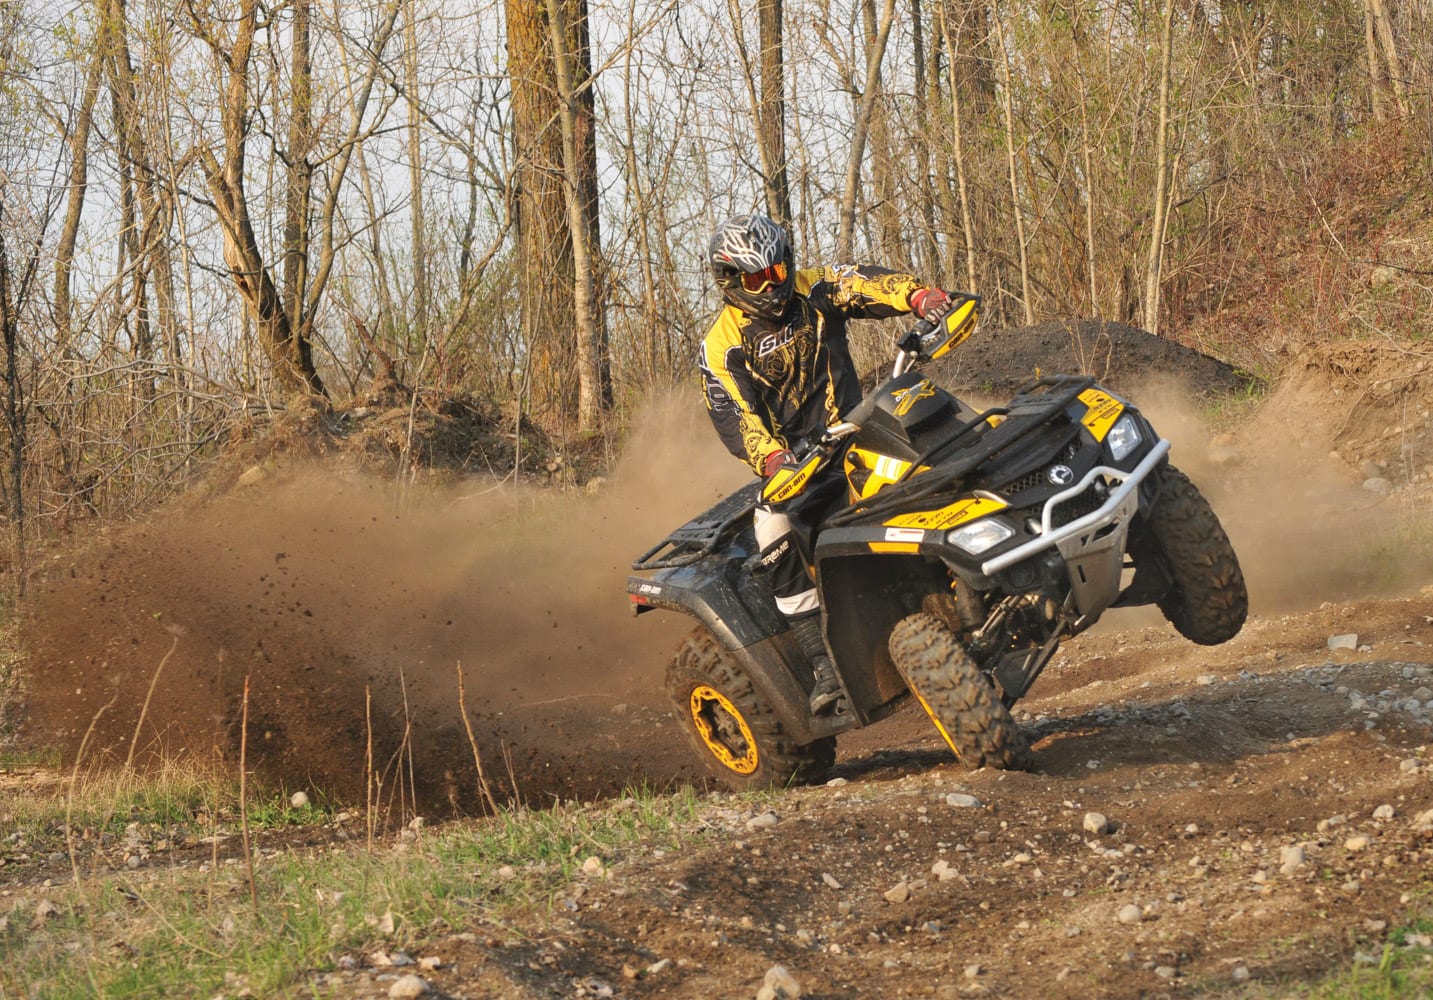 Experienced rider with proper safety gear conquering a challenging motocross trail on two wheels